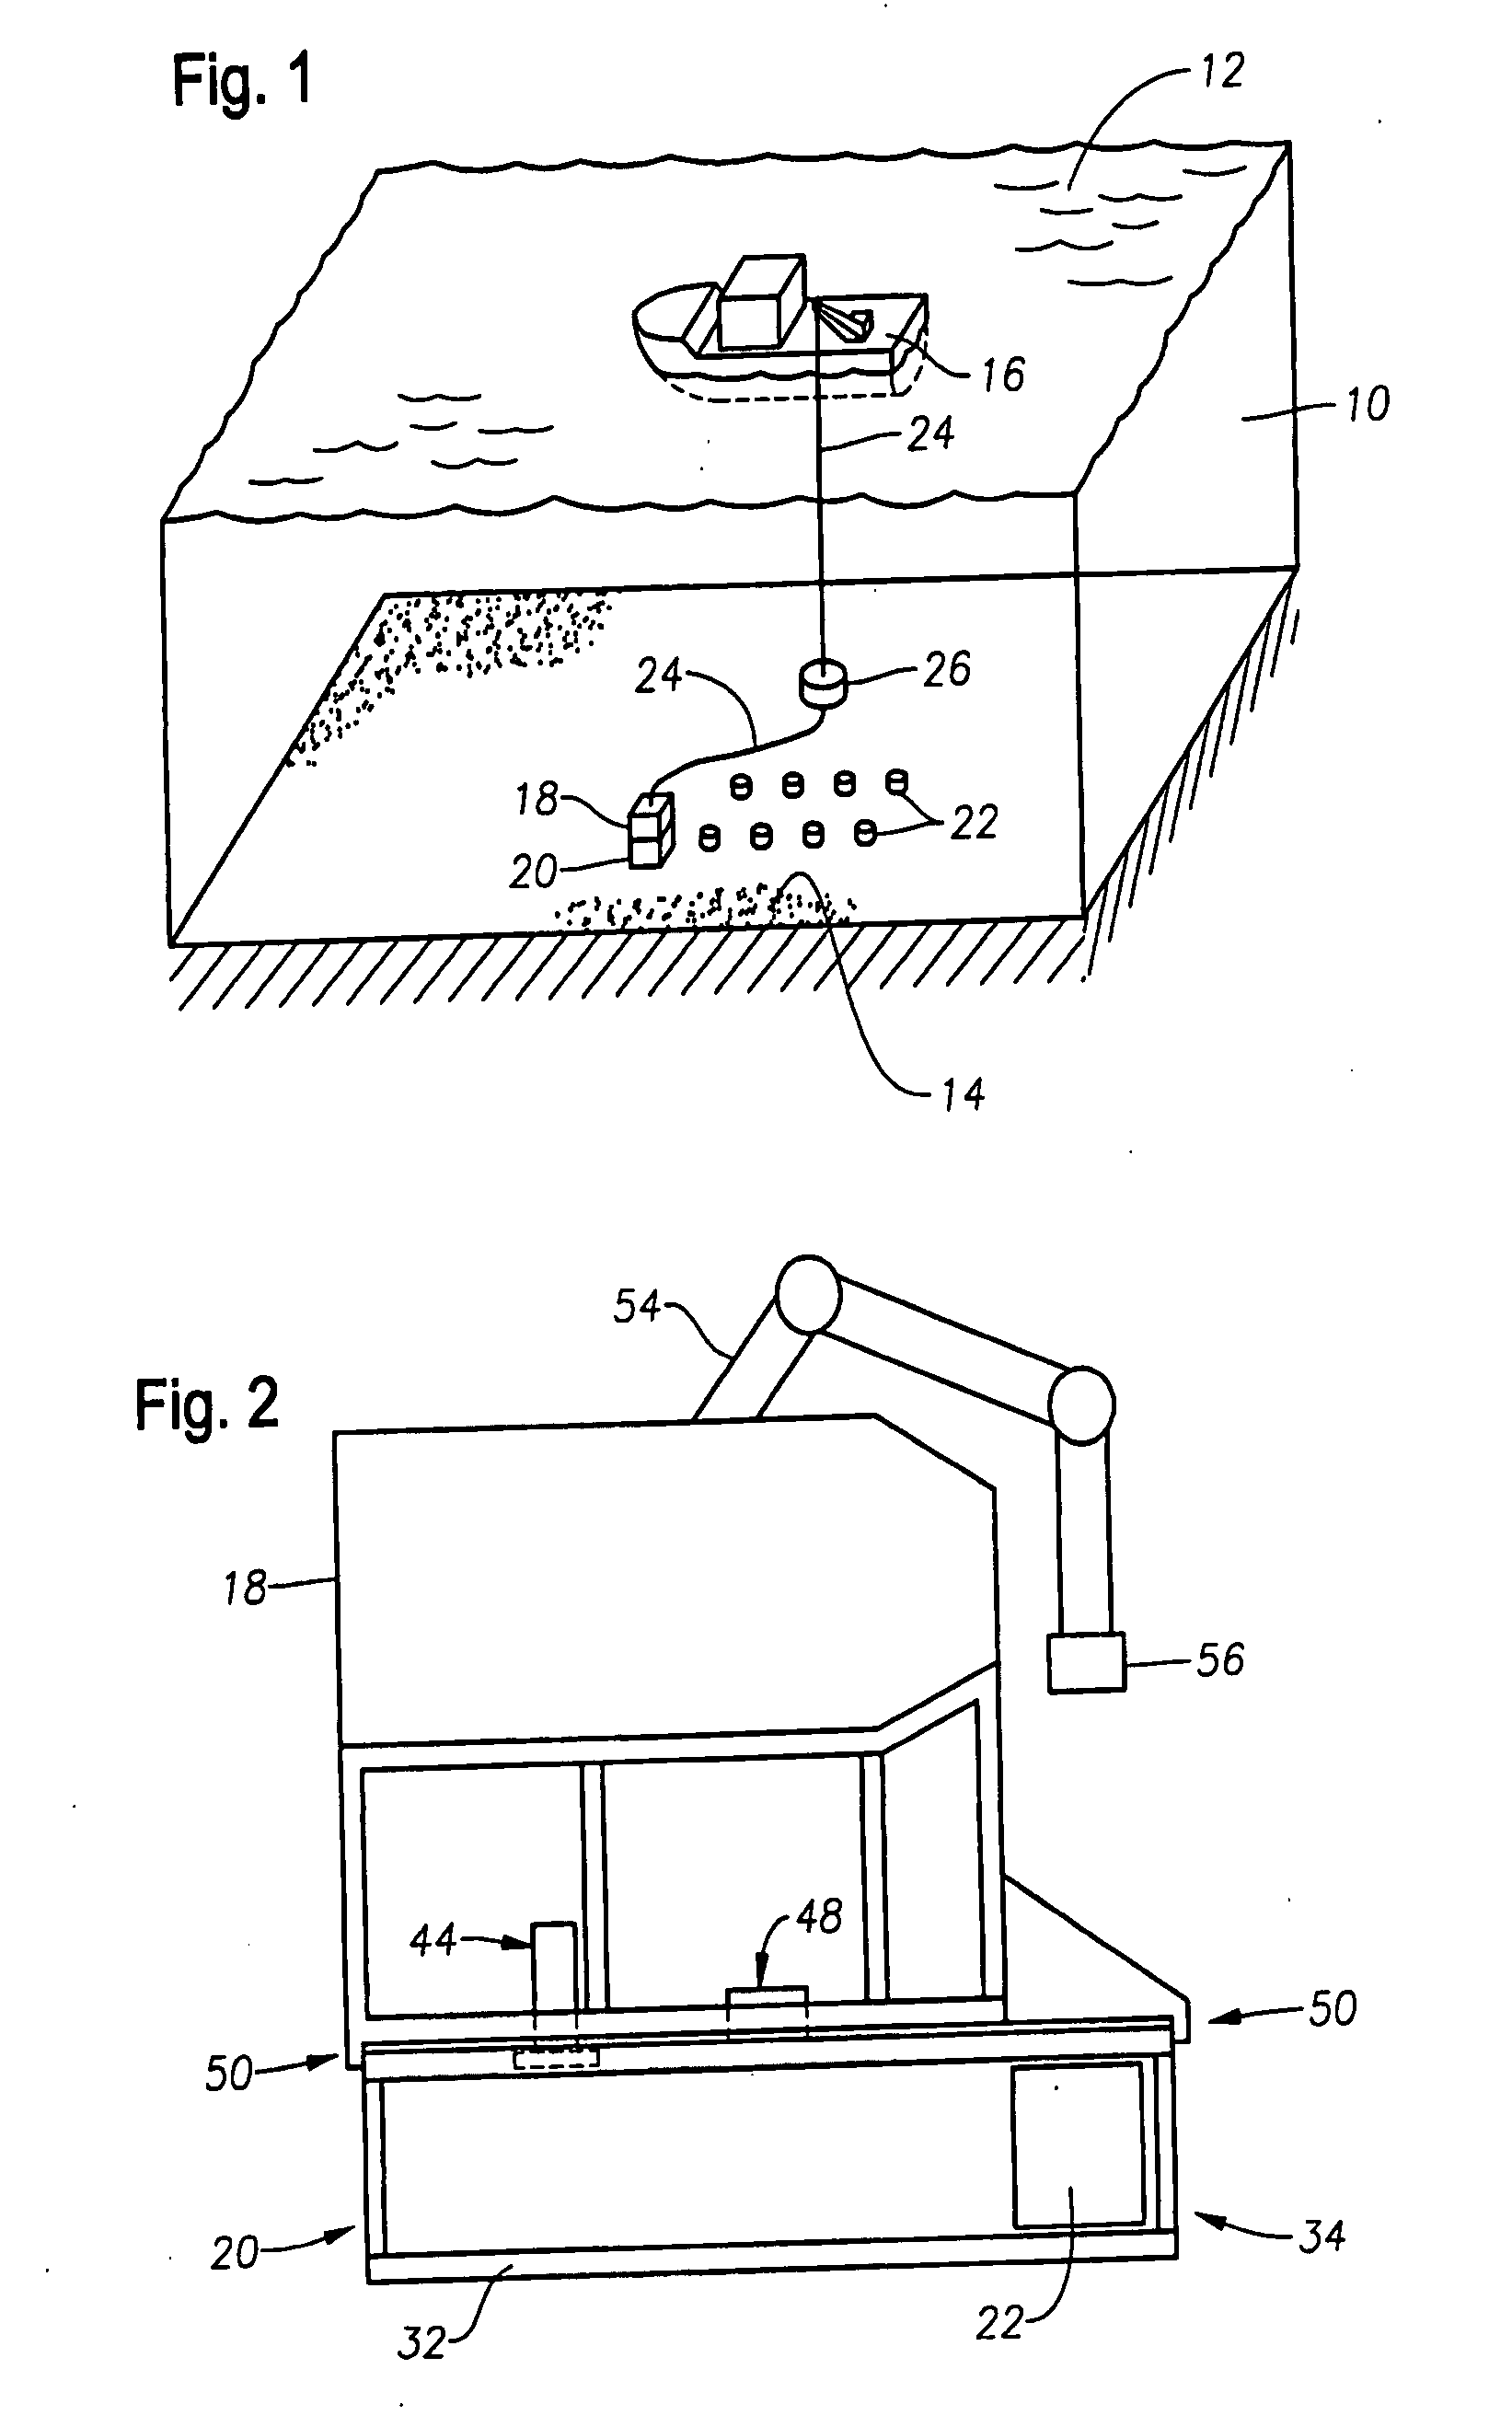 Method and apparatus for deployment of ocean bottom seismometers